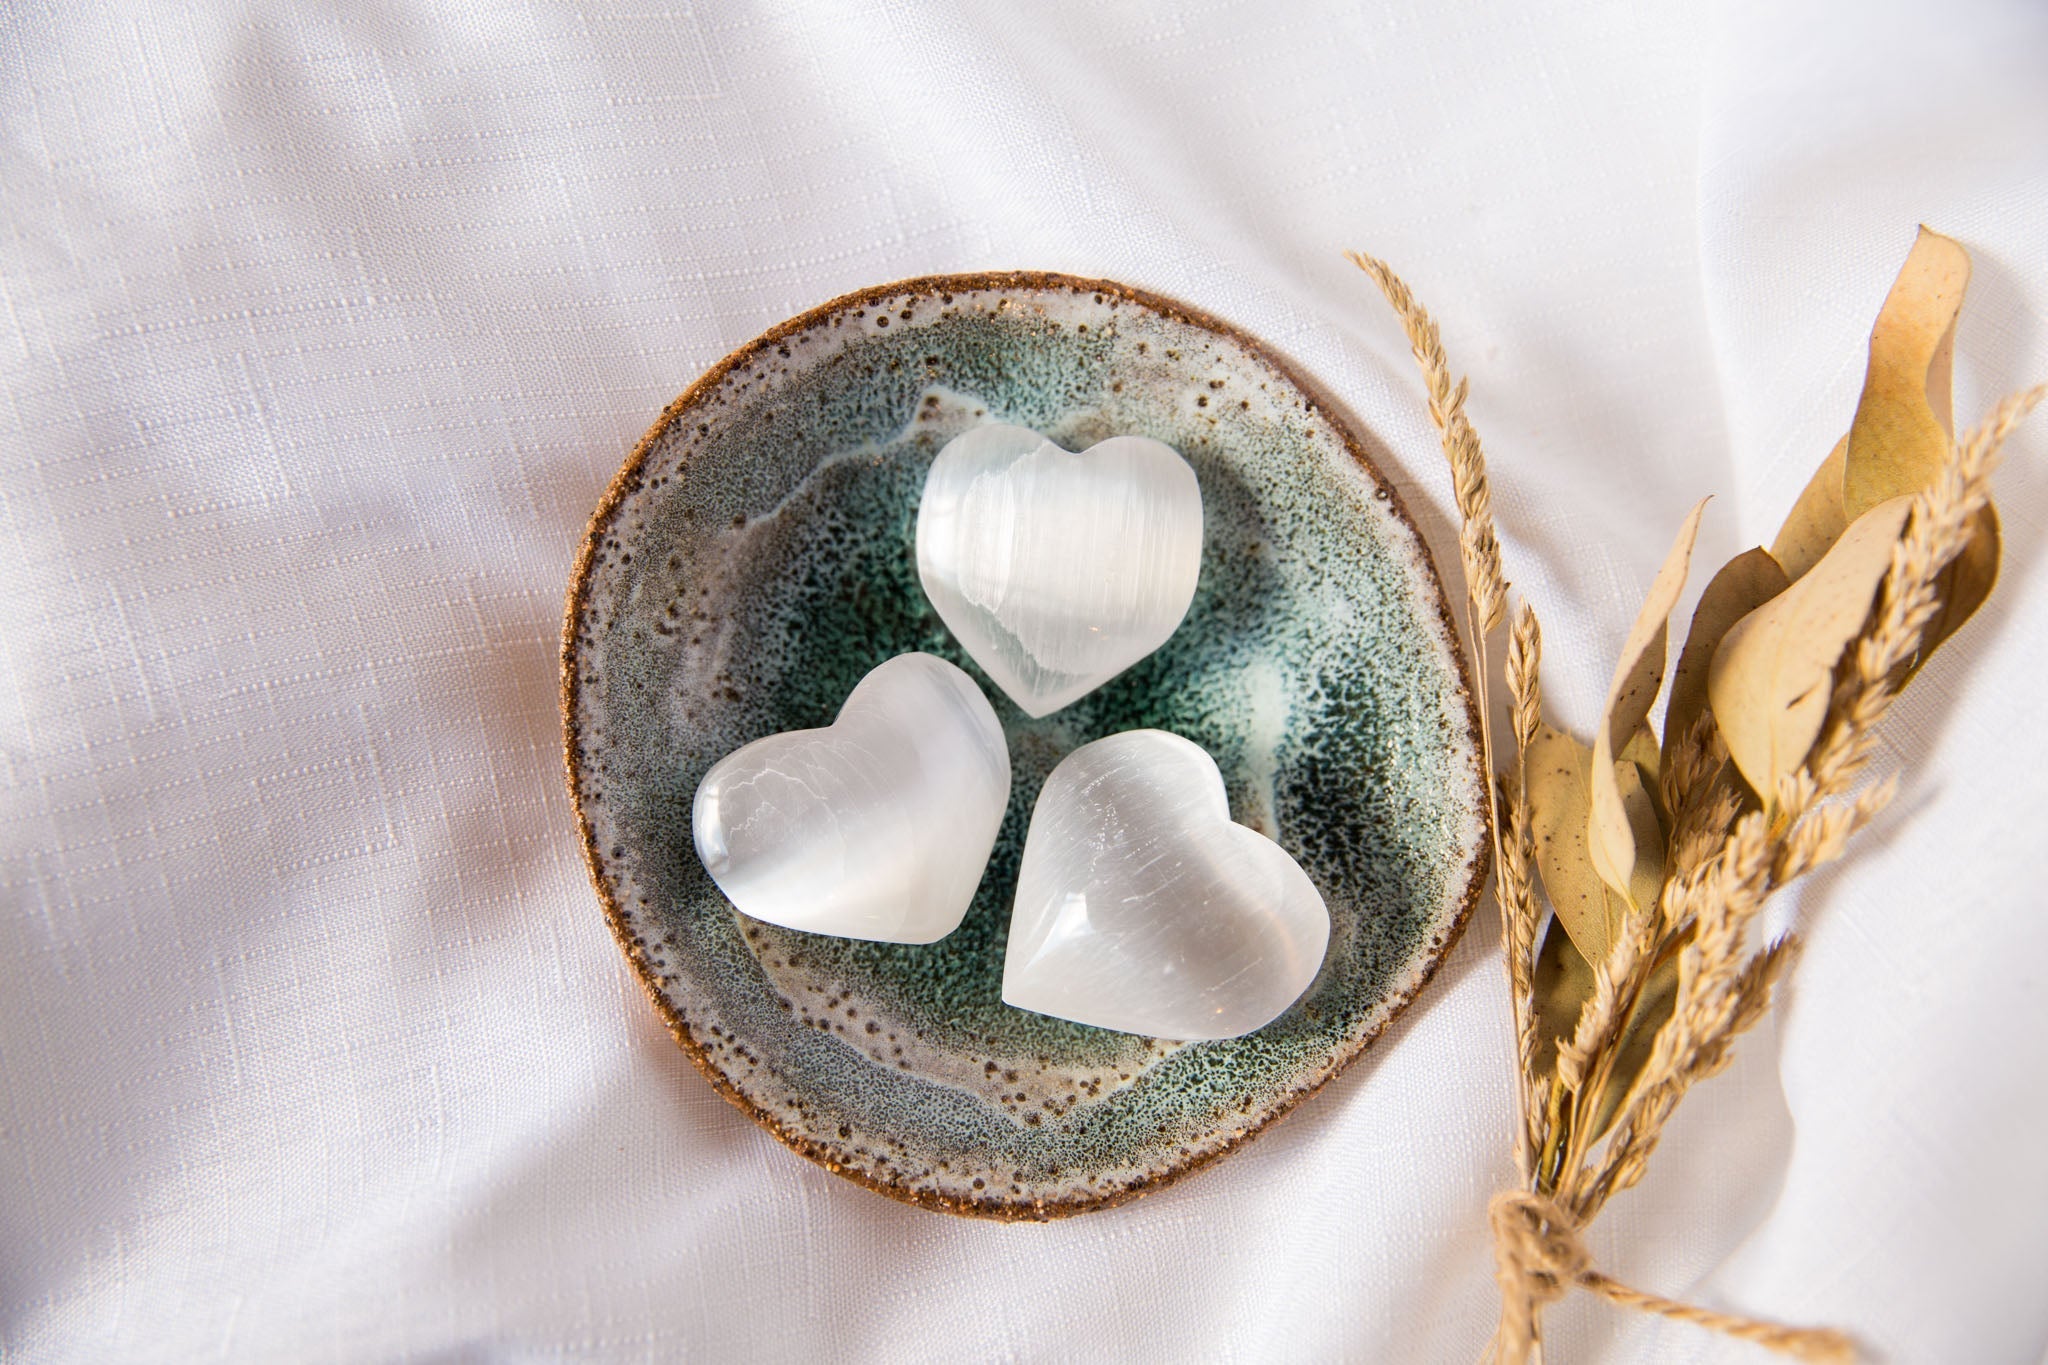 Satin Spar (Selenite) Small Hearts - Premium Crystals + Gifts from Clarity Co. - NZ's Favourite Online Crystal Shop